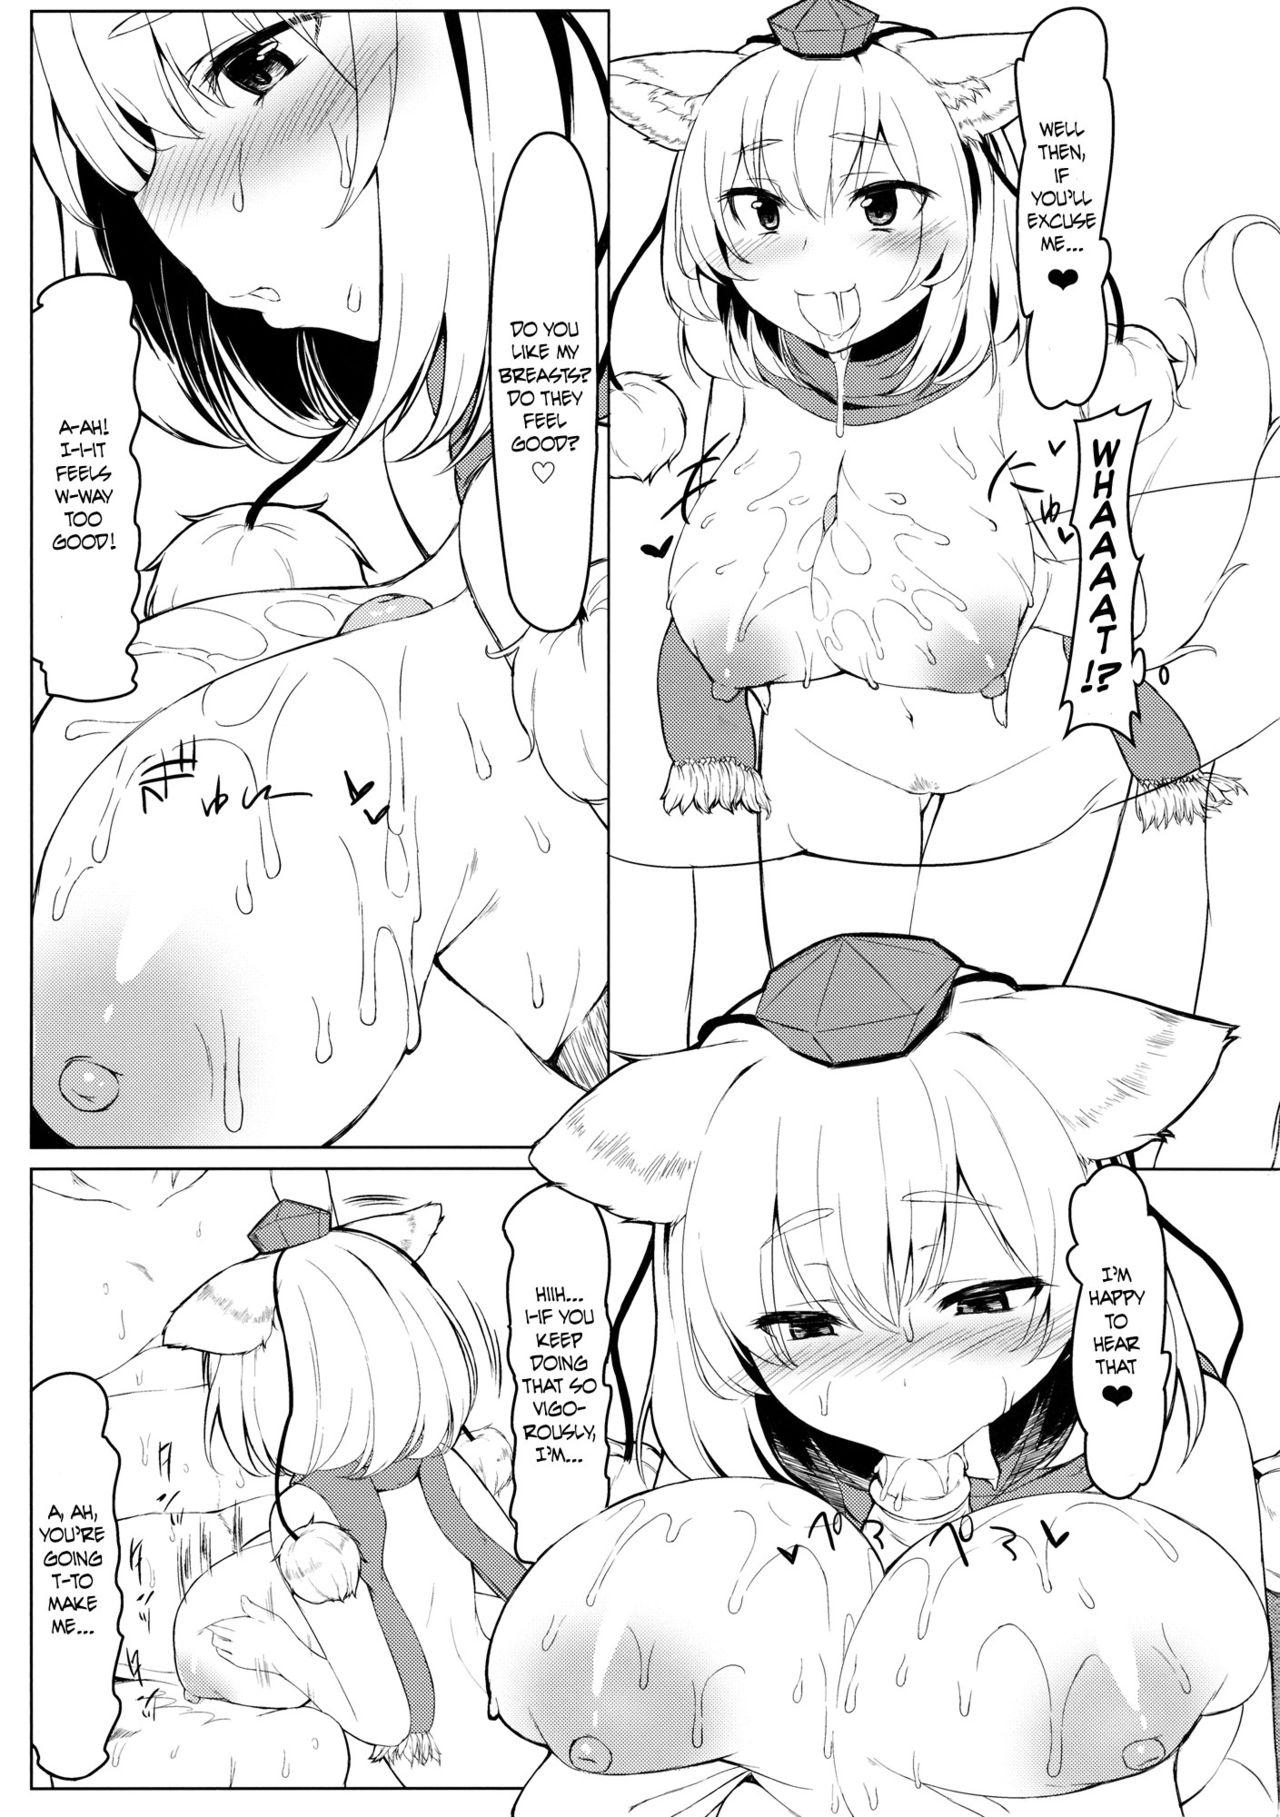 Sucking Cocks KKMK.Return - Touhou project Big Butt - Page 4